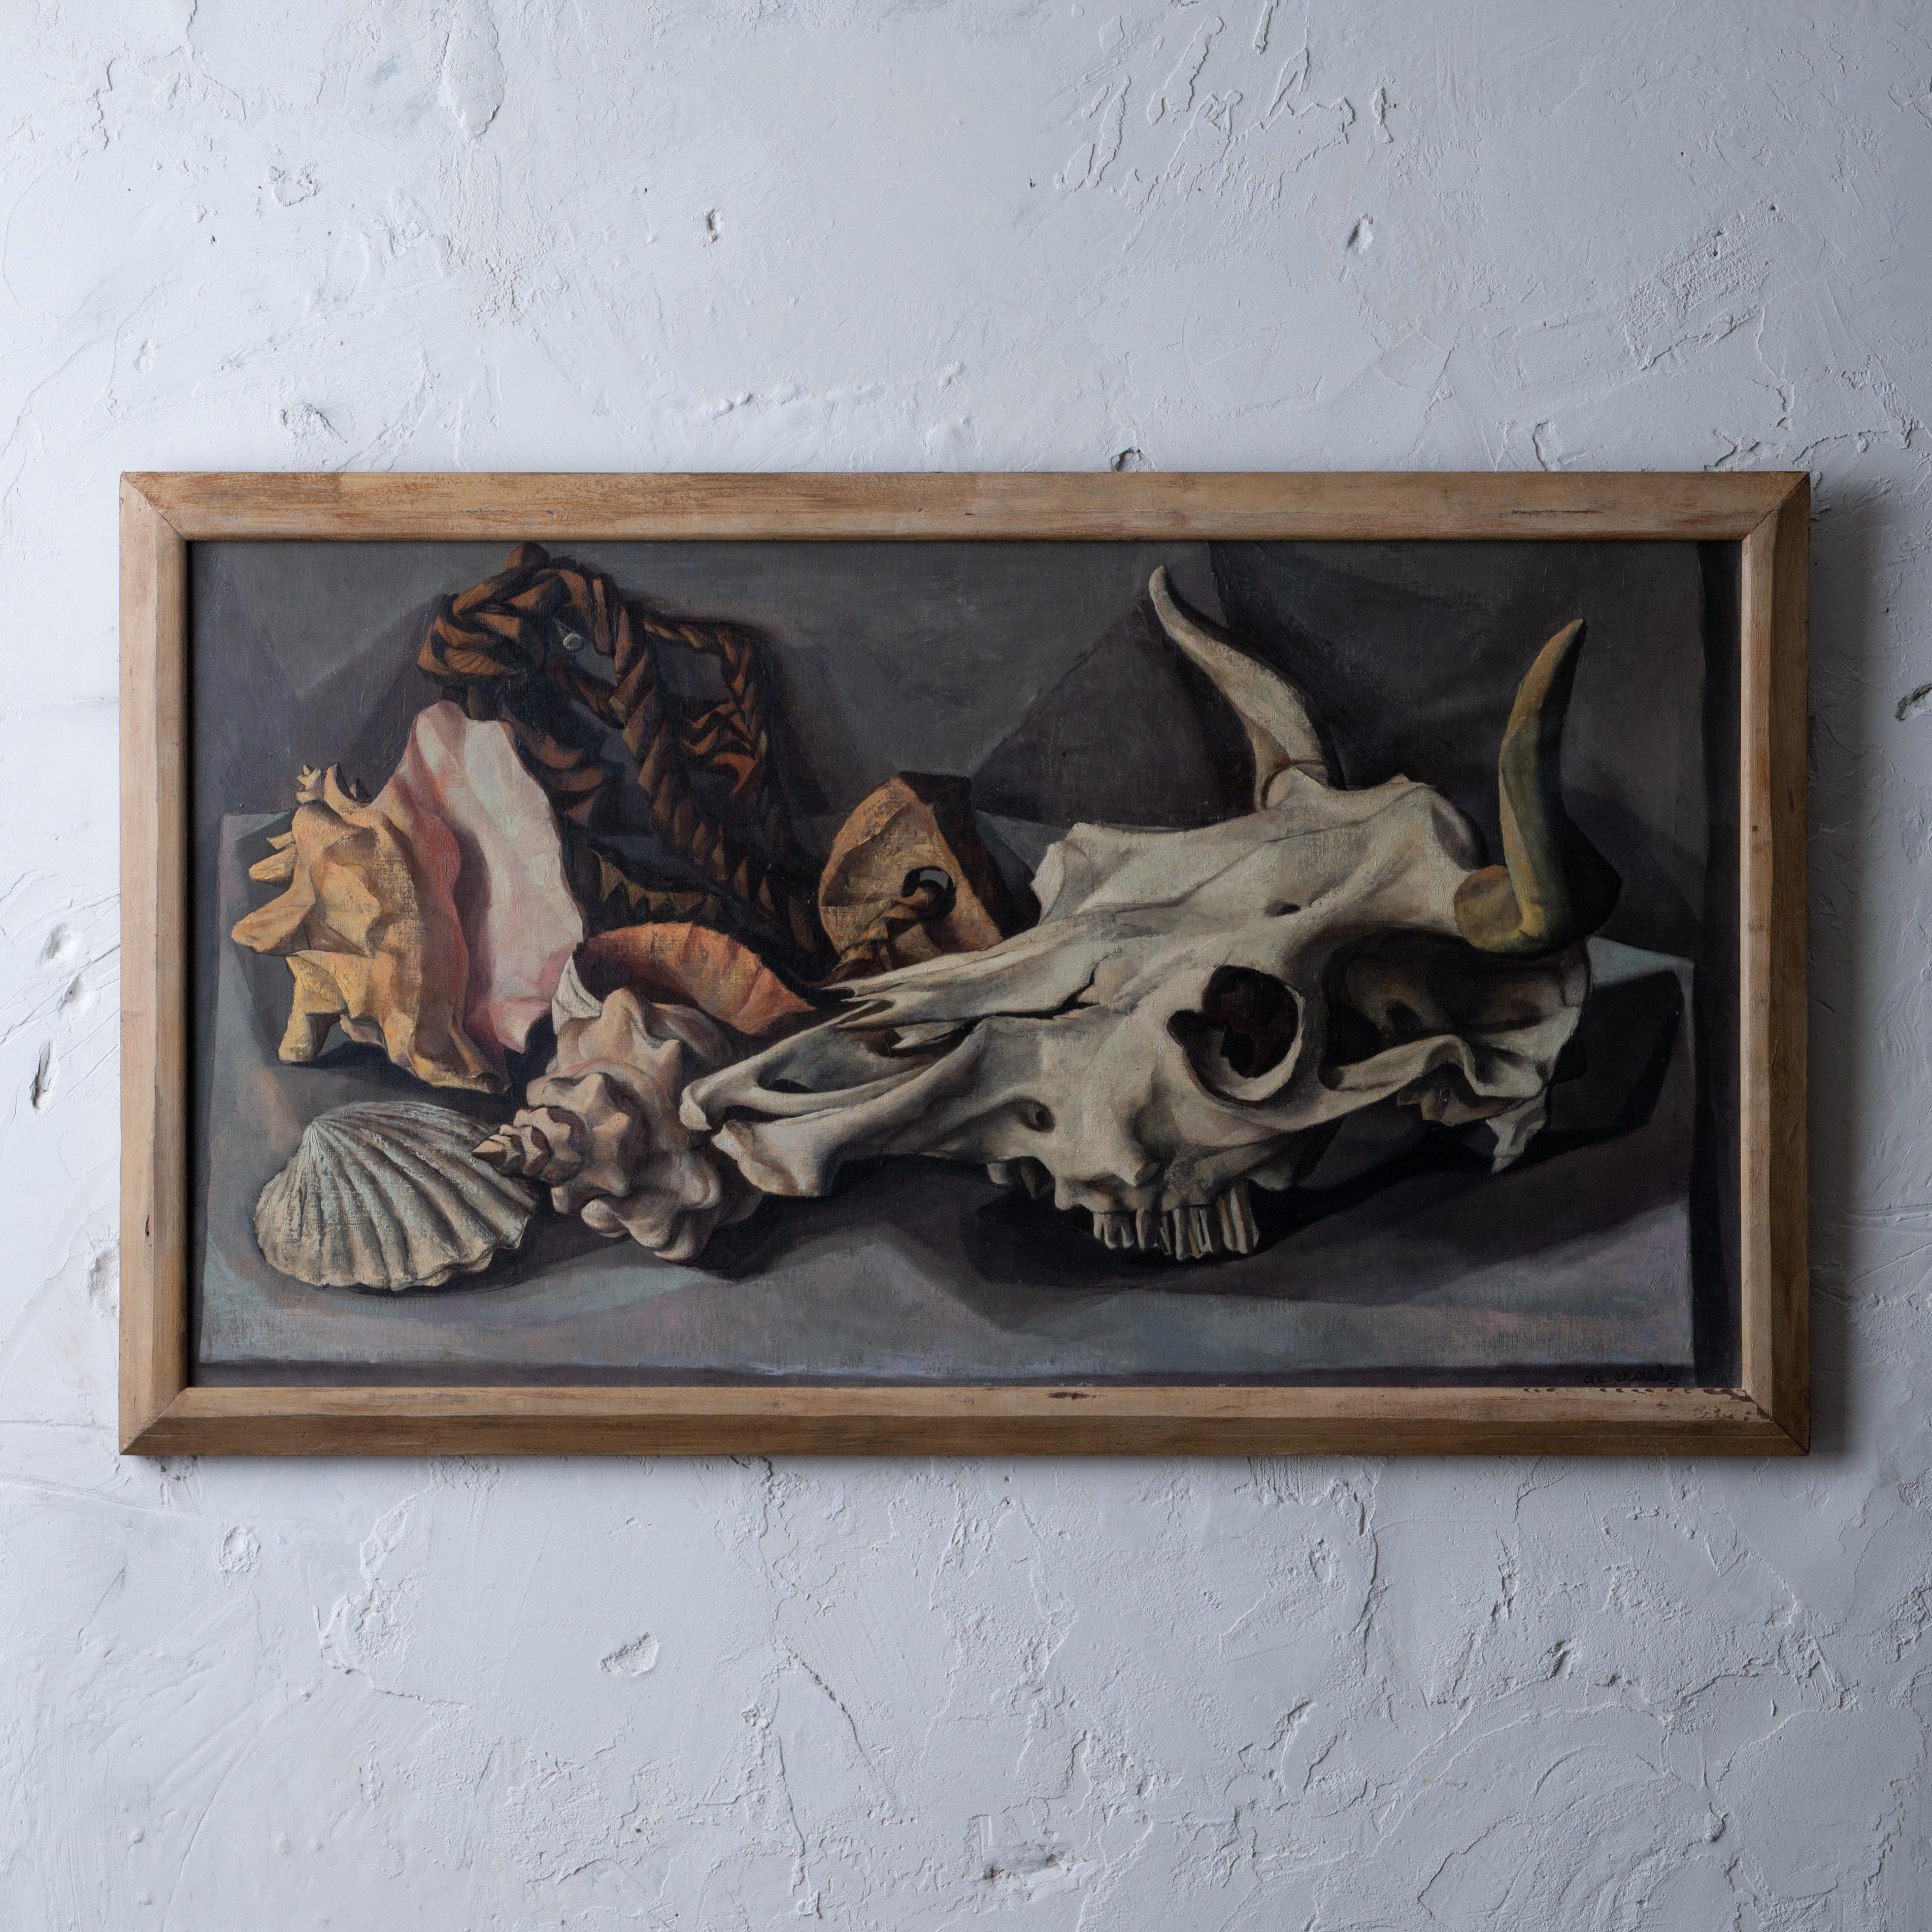 Francis de Erdely
(Hungary/California, 1904-1959)

Still life with skull and shells, circa 1950
oil on canvas

sight: 35 ½ by 19 ¼ inches
Frame: 38 ½ by 22 ½ inches 